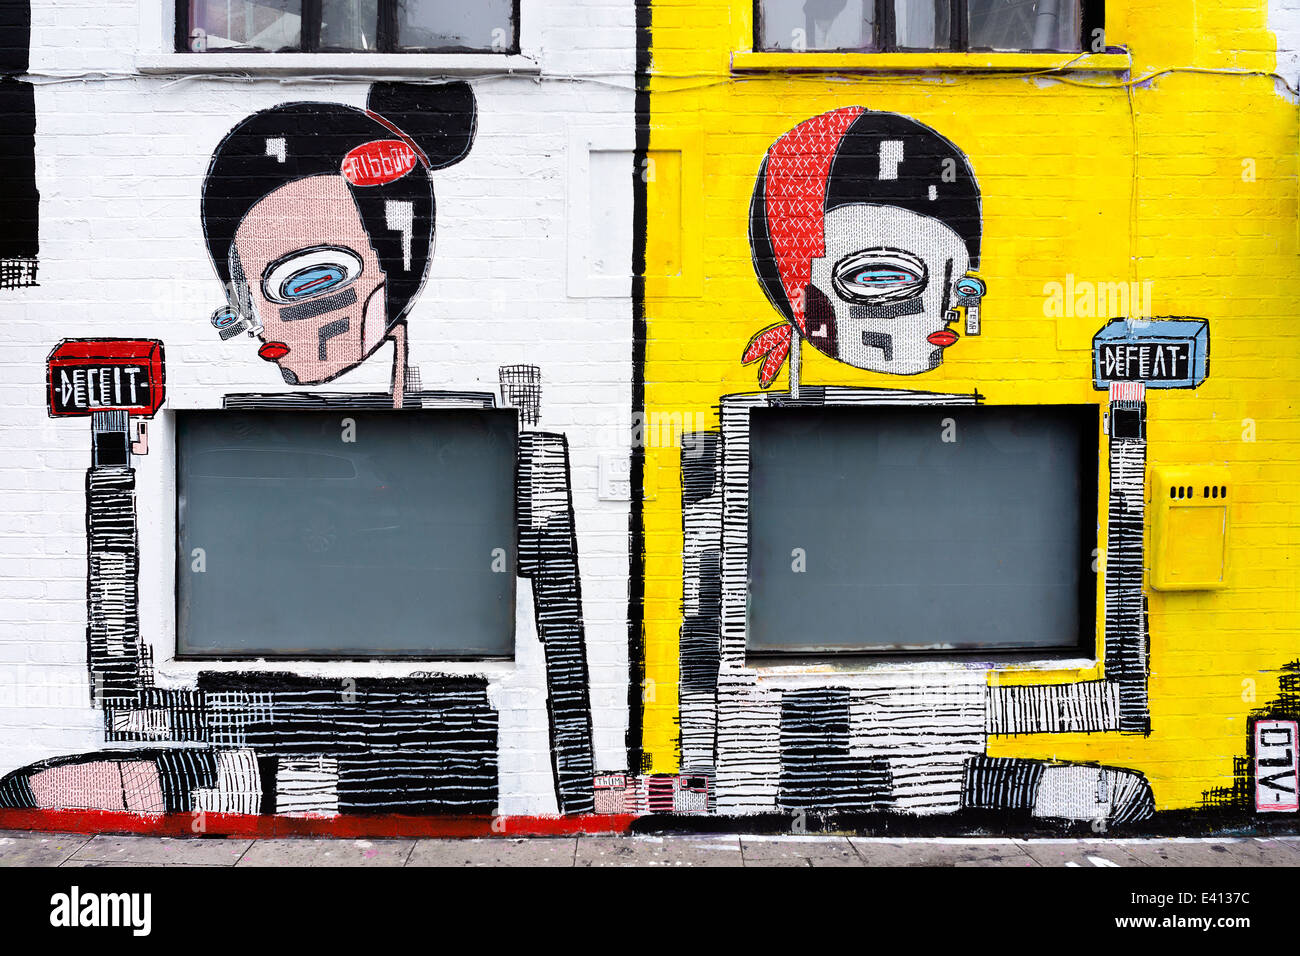 England, London, Shoreditch, Great Eastern Street, graffito wall painting of artist Alo, partial view Stock Photo